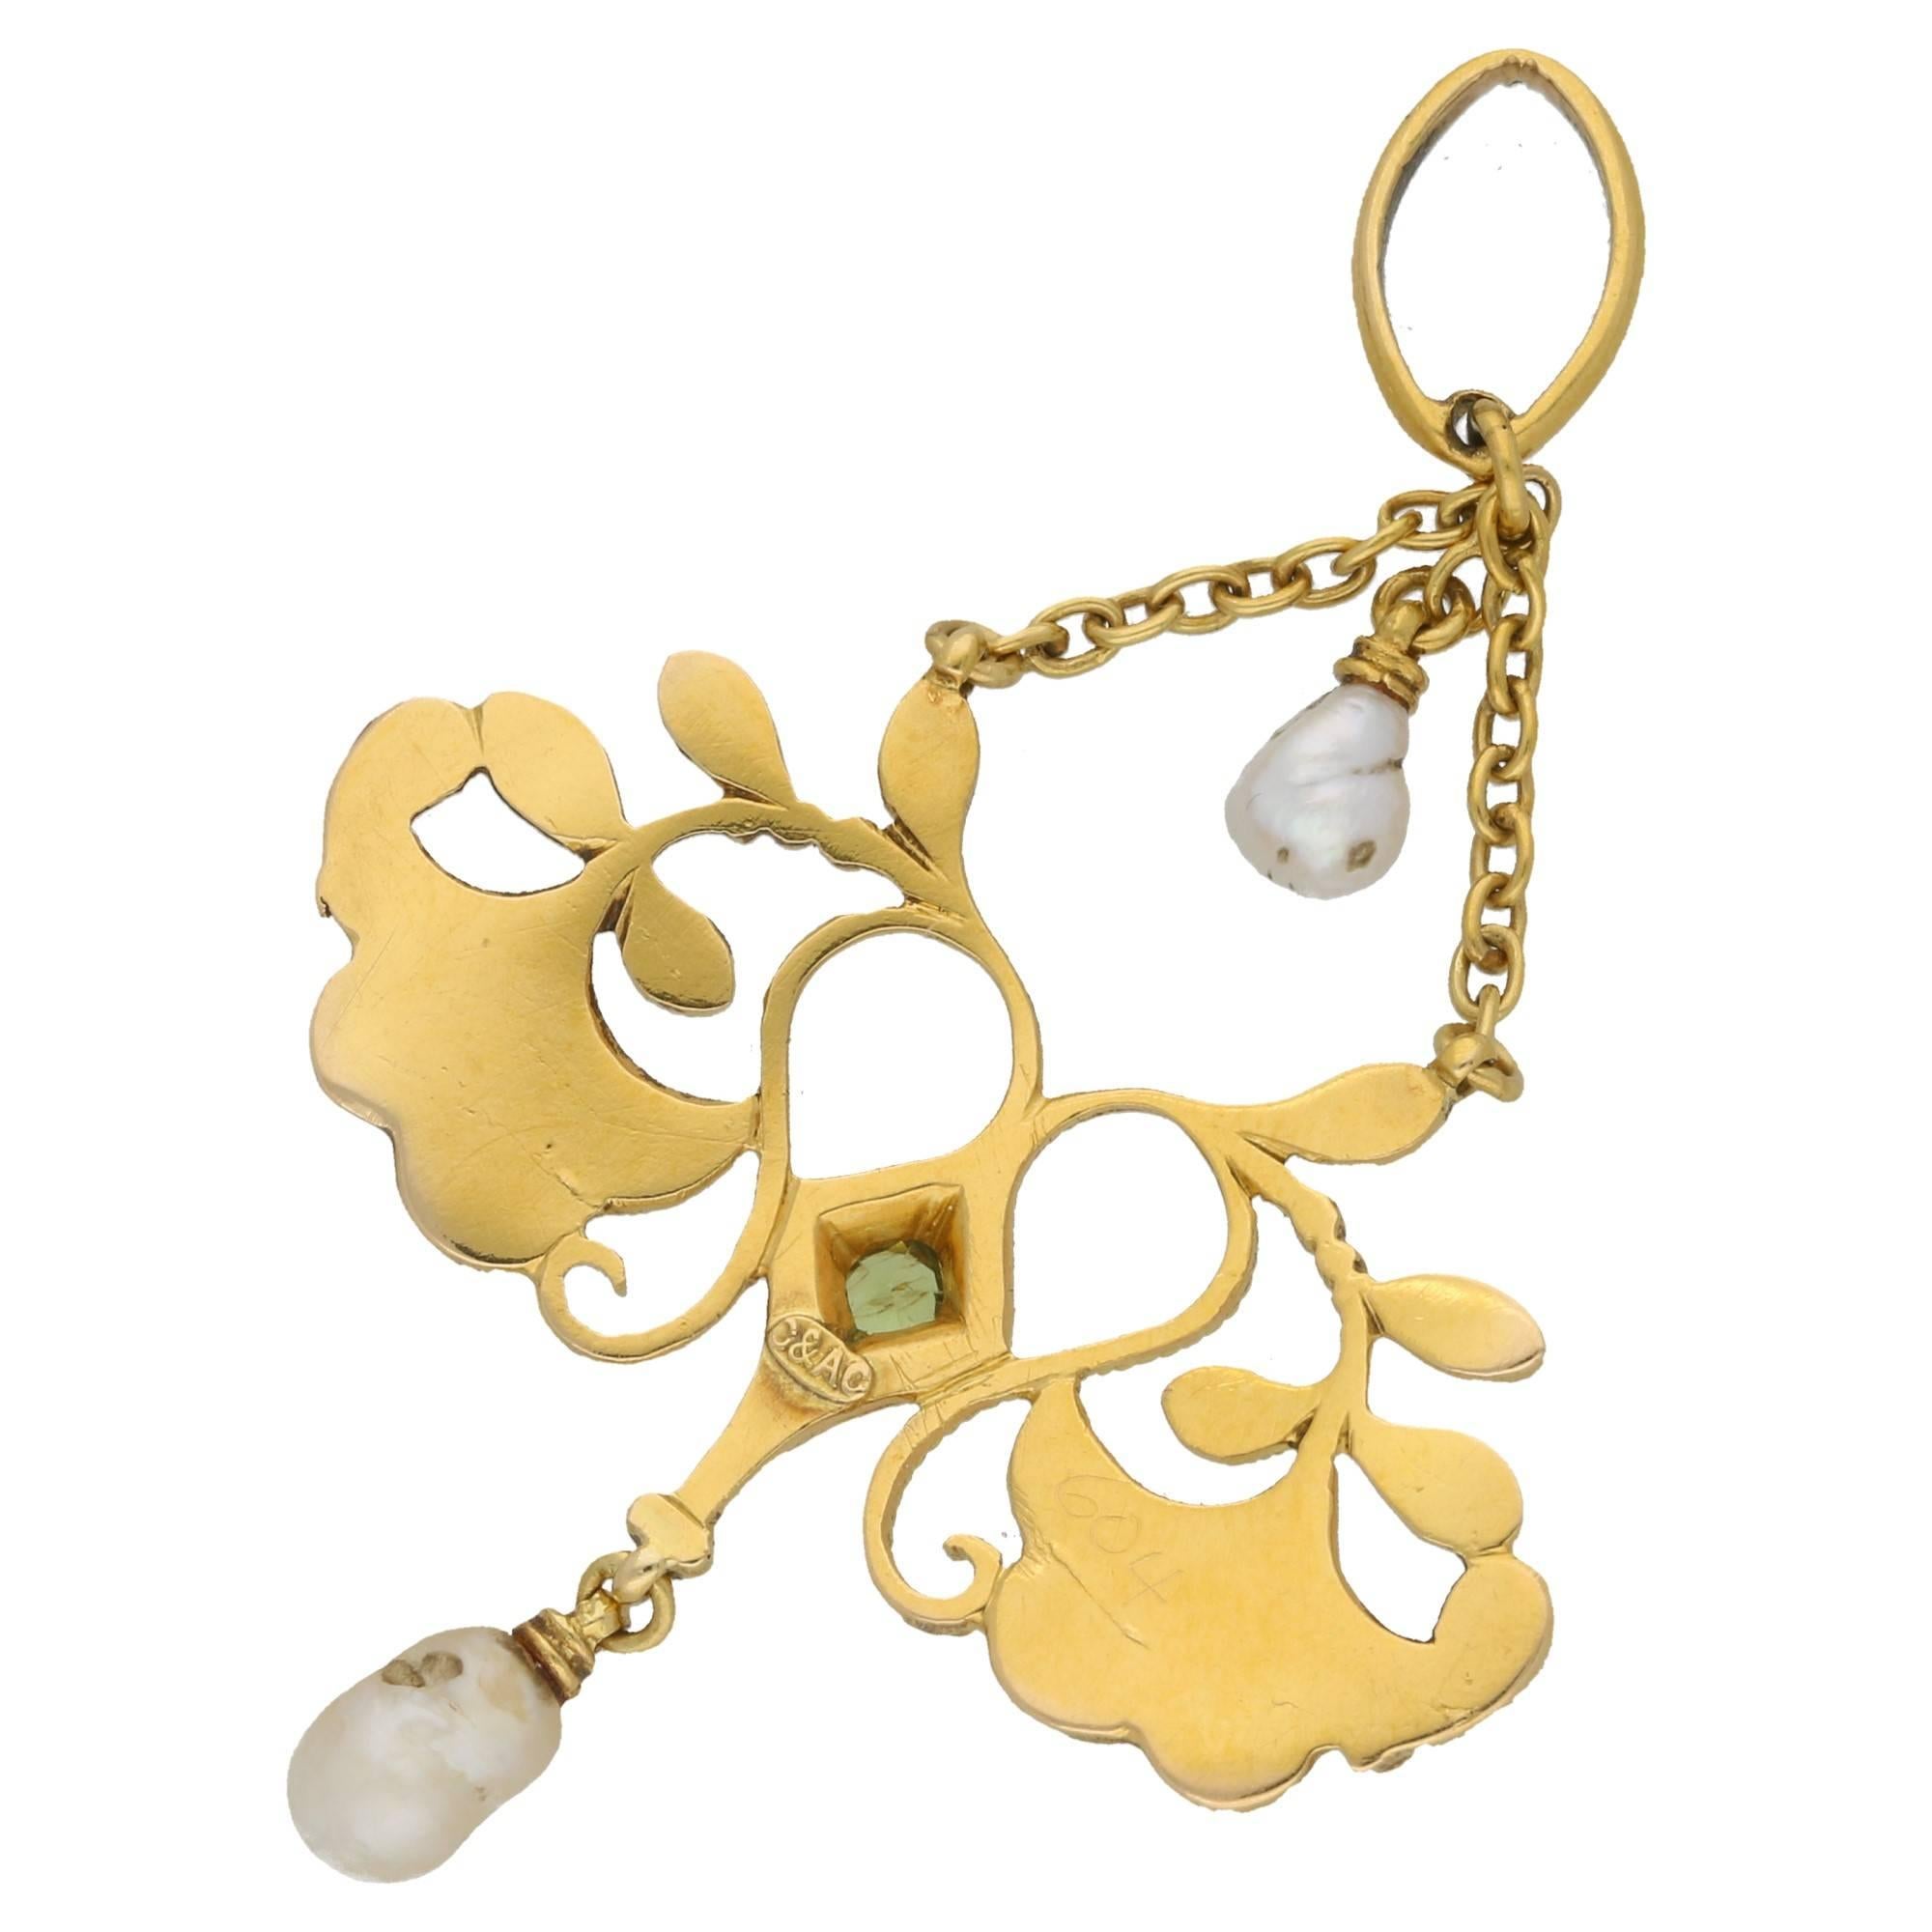 An elegant Art Nouveau Carlo Giuliano enamel, pearl and demantoid garnet pendant set in 18 carat yellow gold. The pendant is set with two unique natural pearl drops above and below the panel set green garnet. On either side we see hand enamelled